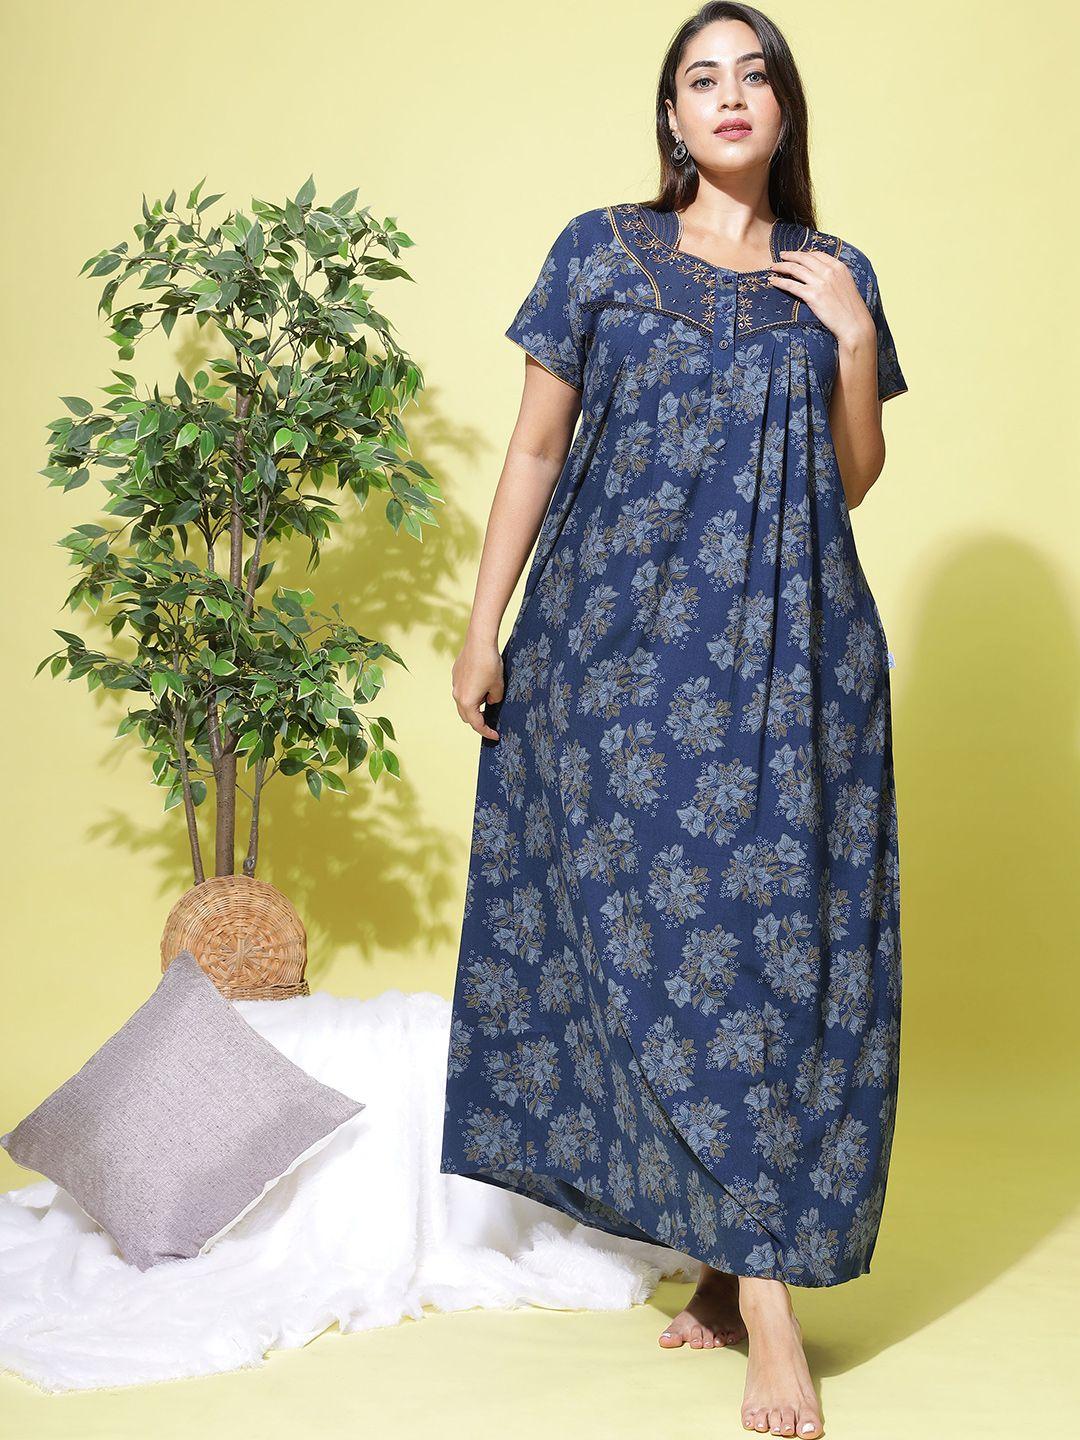 9shines label floral printed maxi everyday nightdress